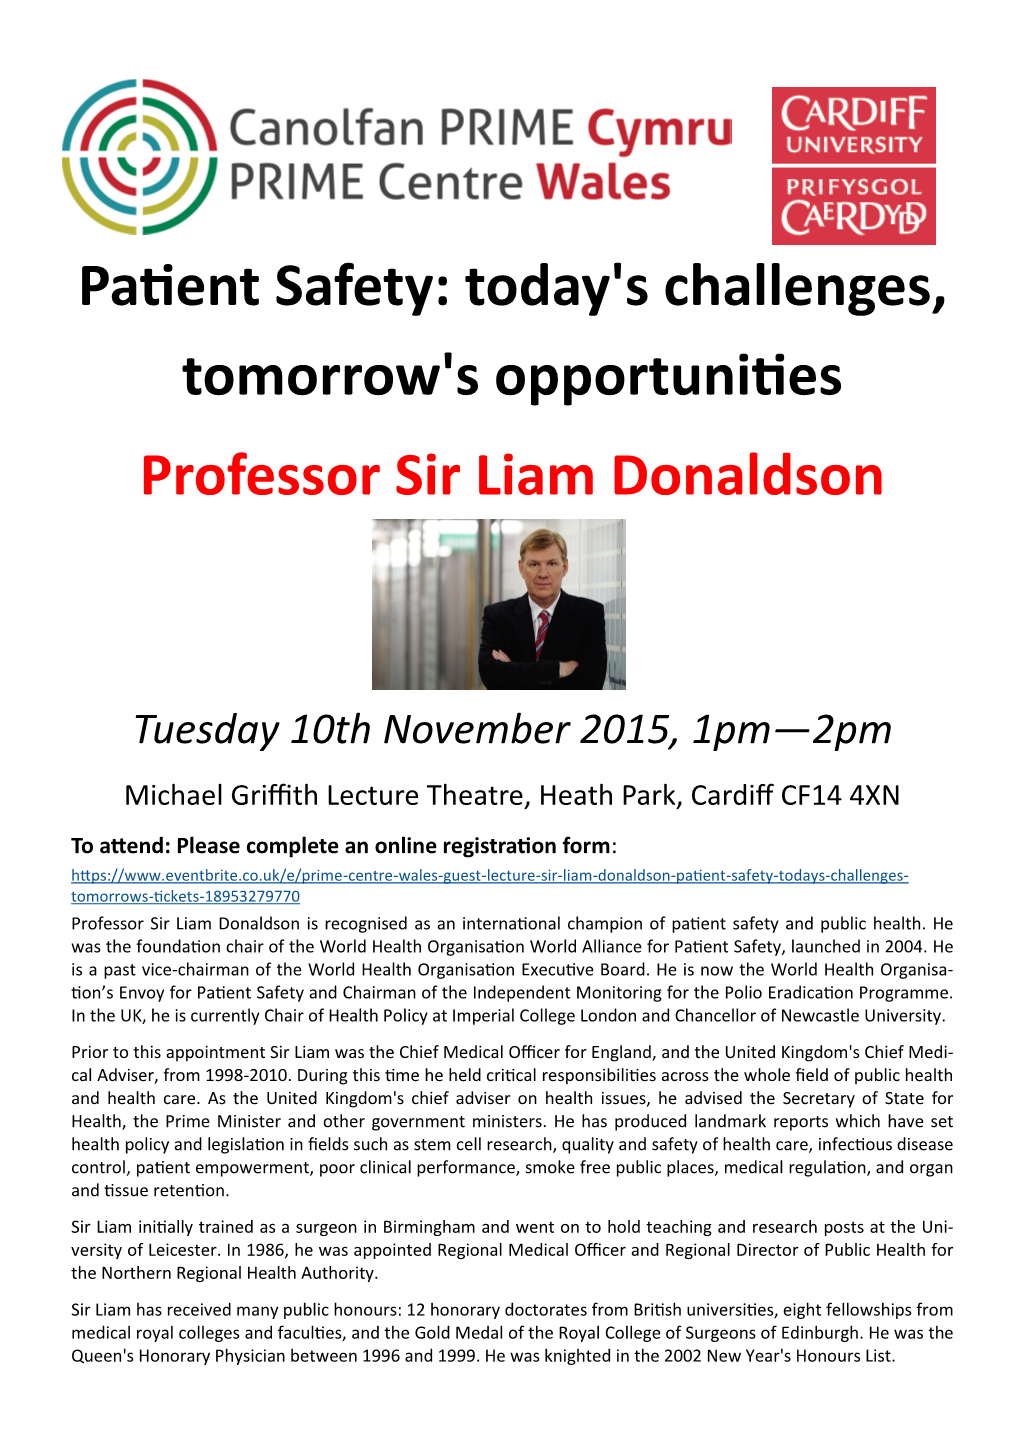 Patient Safety: Today's Challenges, Tomorrow's Opportunities Professor